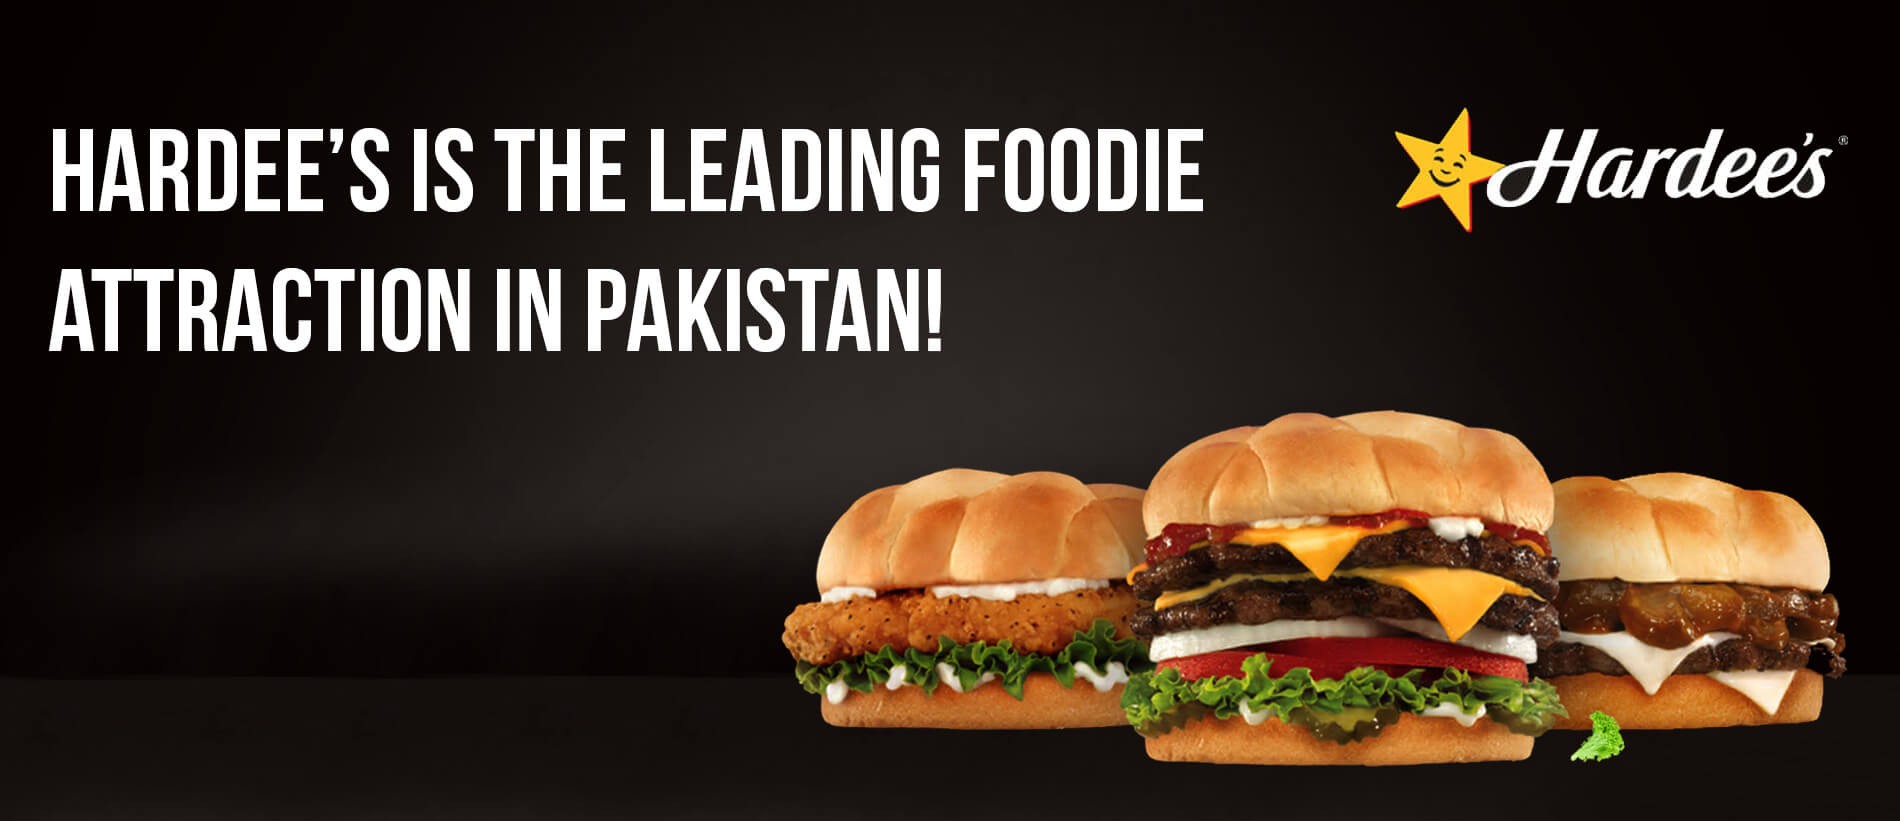 Who's the leading foodie attraction in Pakistan? Image